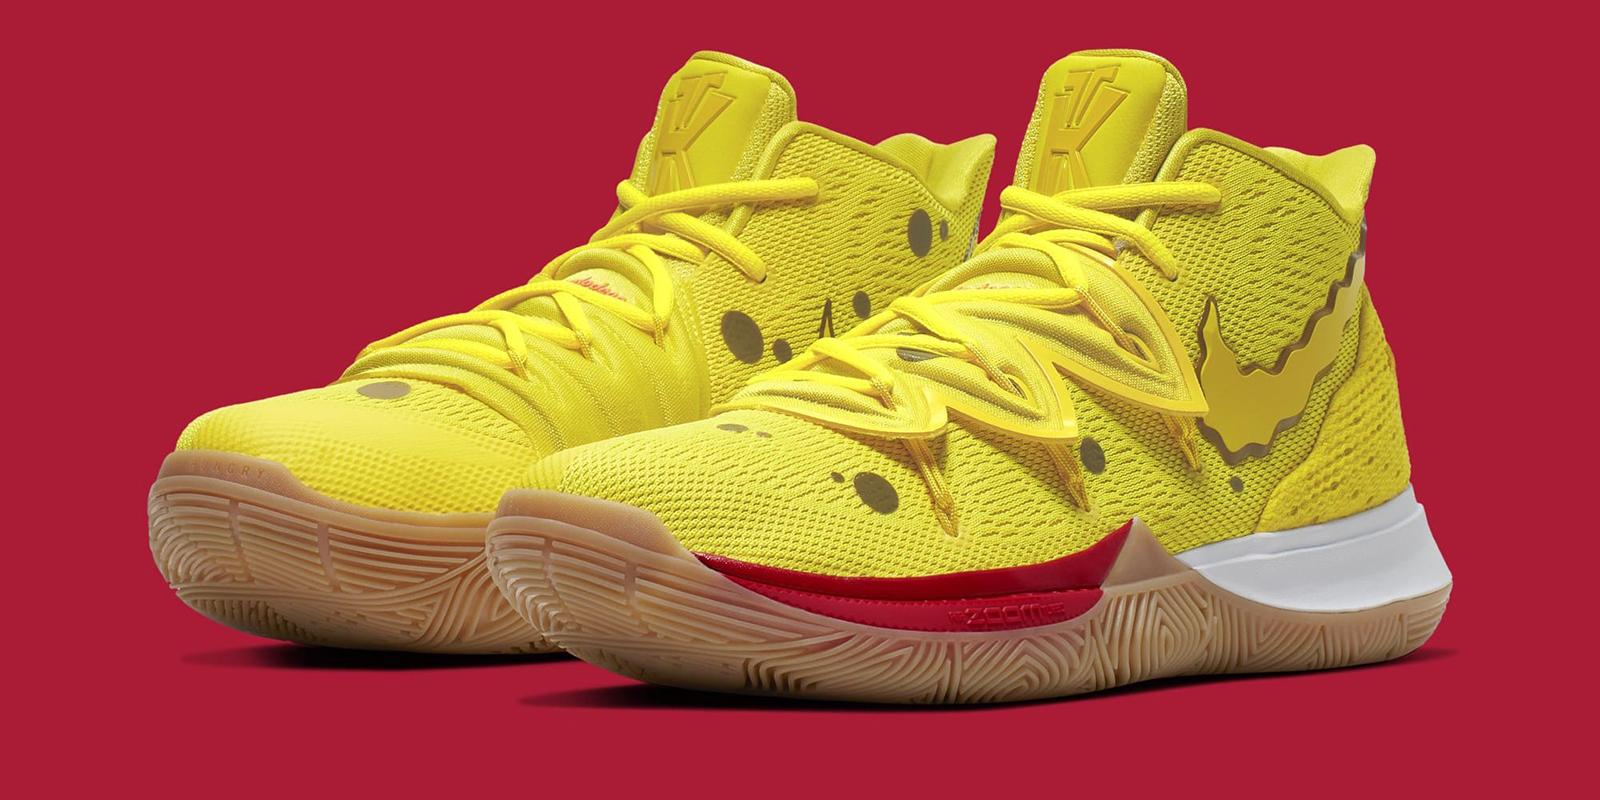 How Inclusion Played a Role in the Kyrie Irving SpongeBob Sneakers